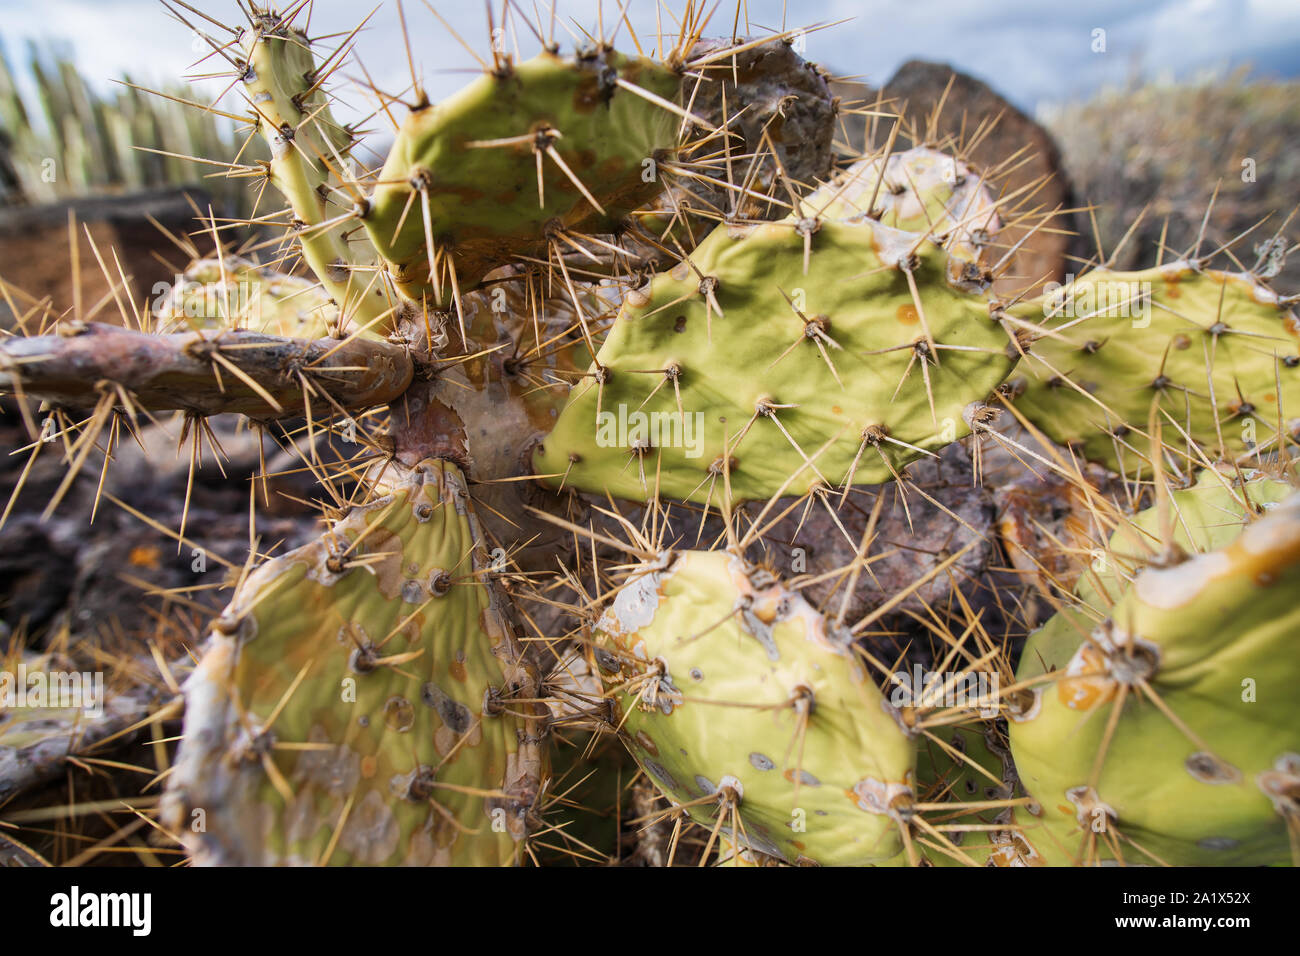 Opuntia ficus-indica, prickly pear, indian fig, ripe tasty fruits. Cactus close-up shot in Tenerife, Canary islands, Spain Stock Photo